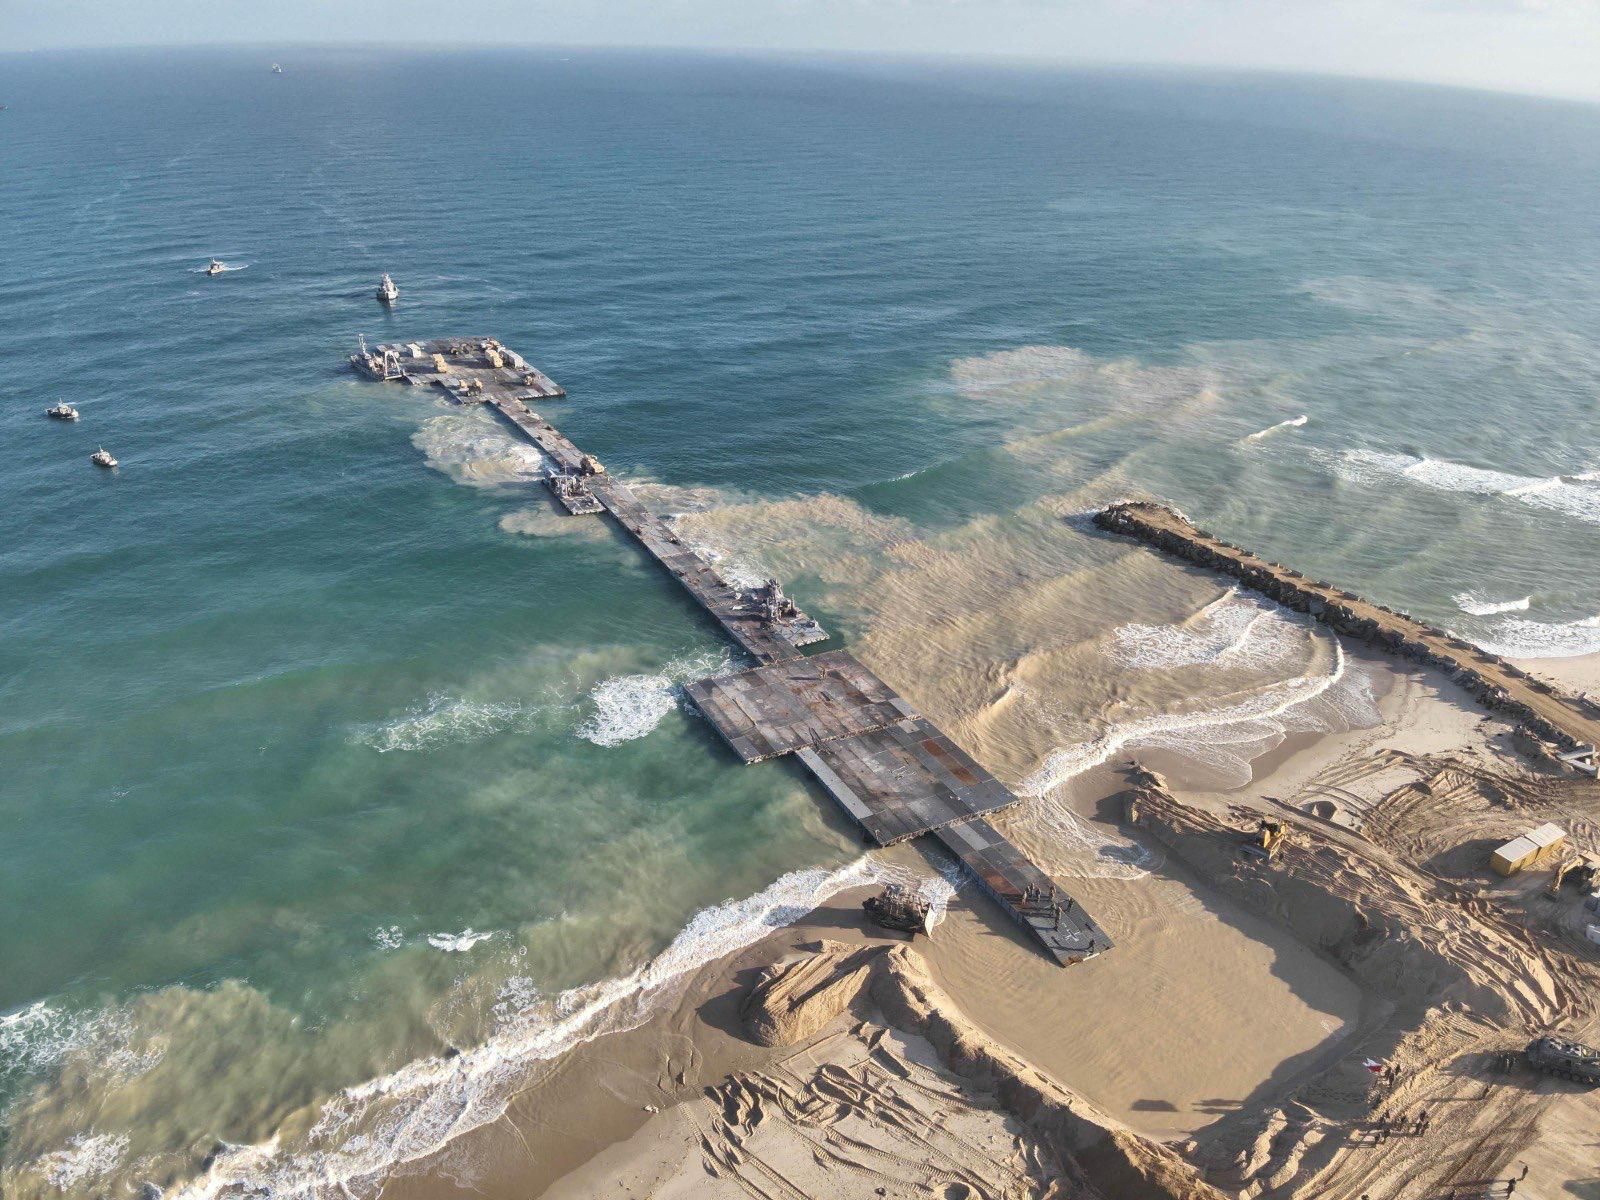 A temporary floating pier built to receive humanitarian aid in the Gaza Strip